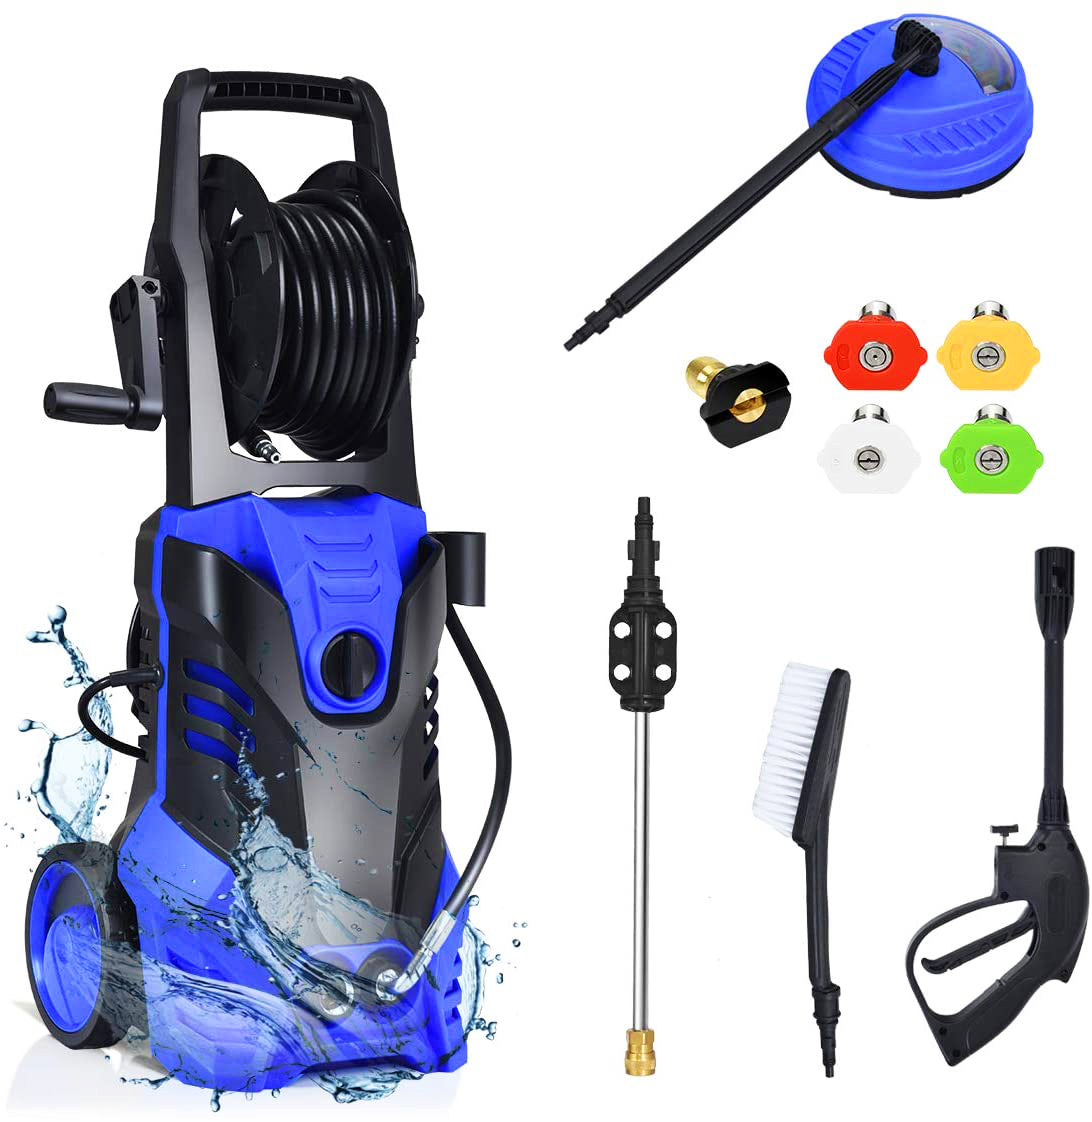 3000 Maximum PSI 2 GPM 13 Amp Cold Water Electric Pressure Washer with 5 Nozzles